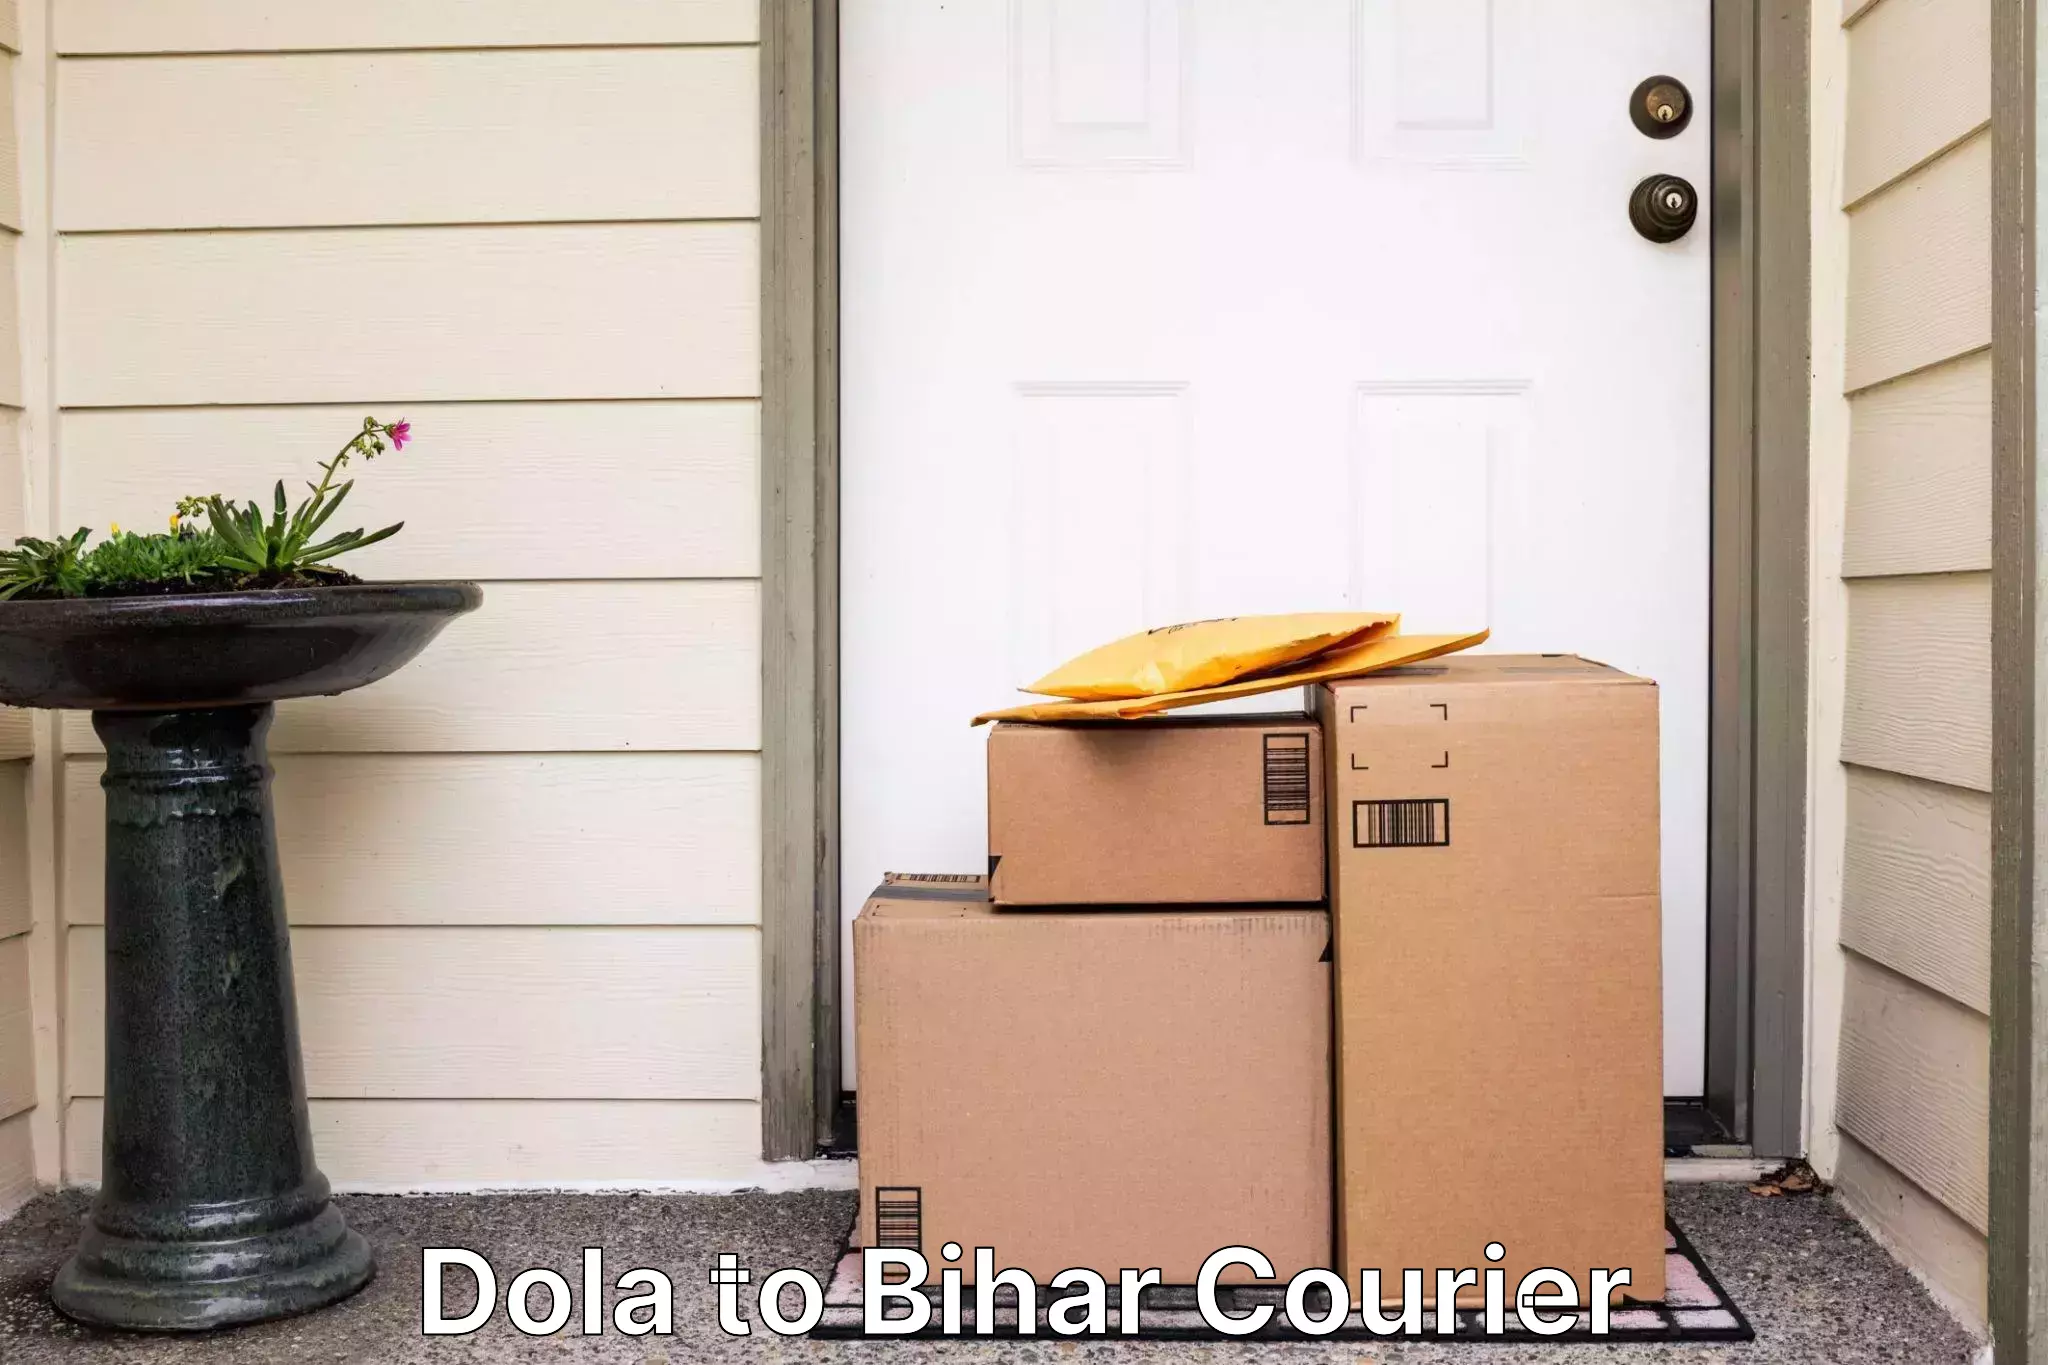 Overnight delivery services Dola to Bihar